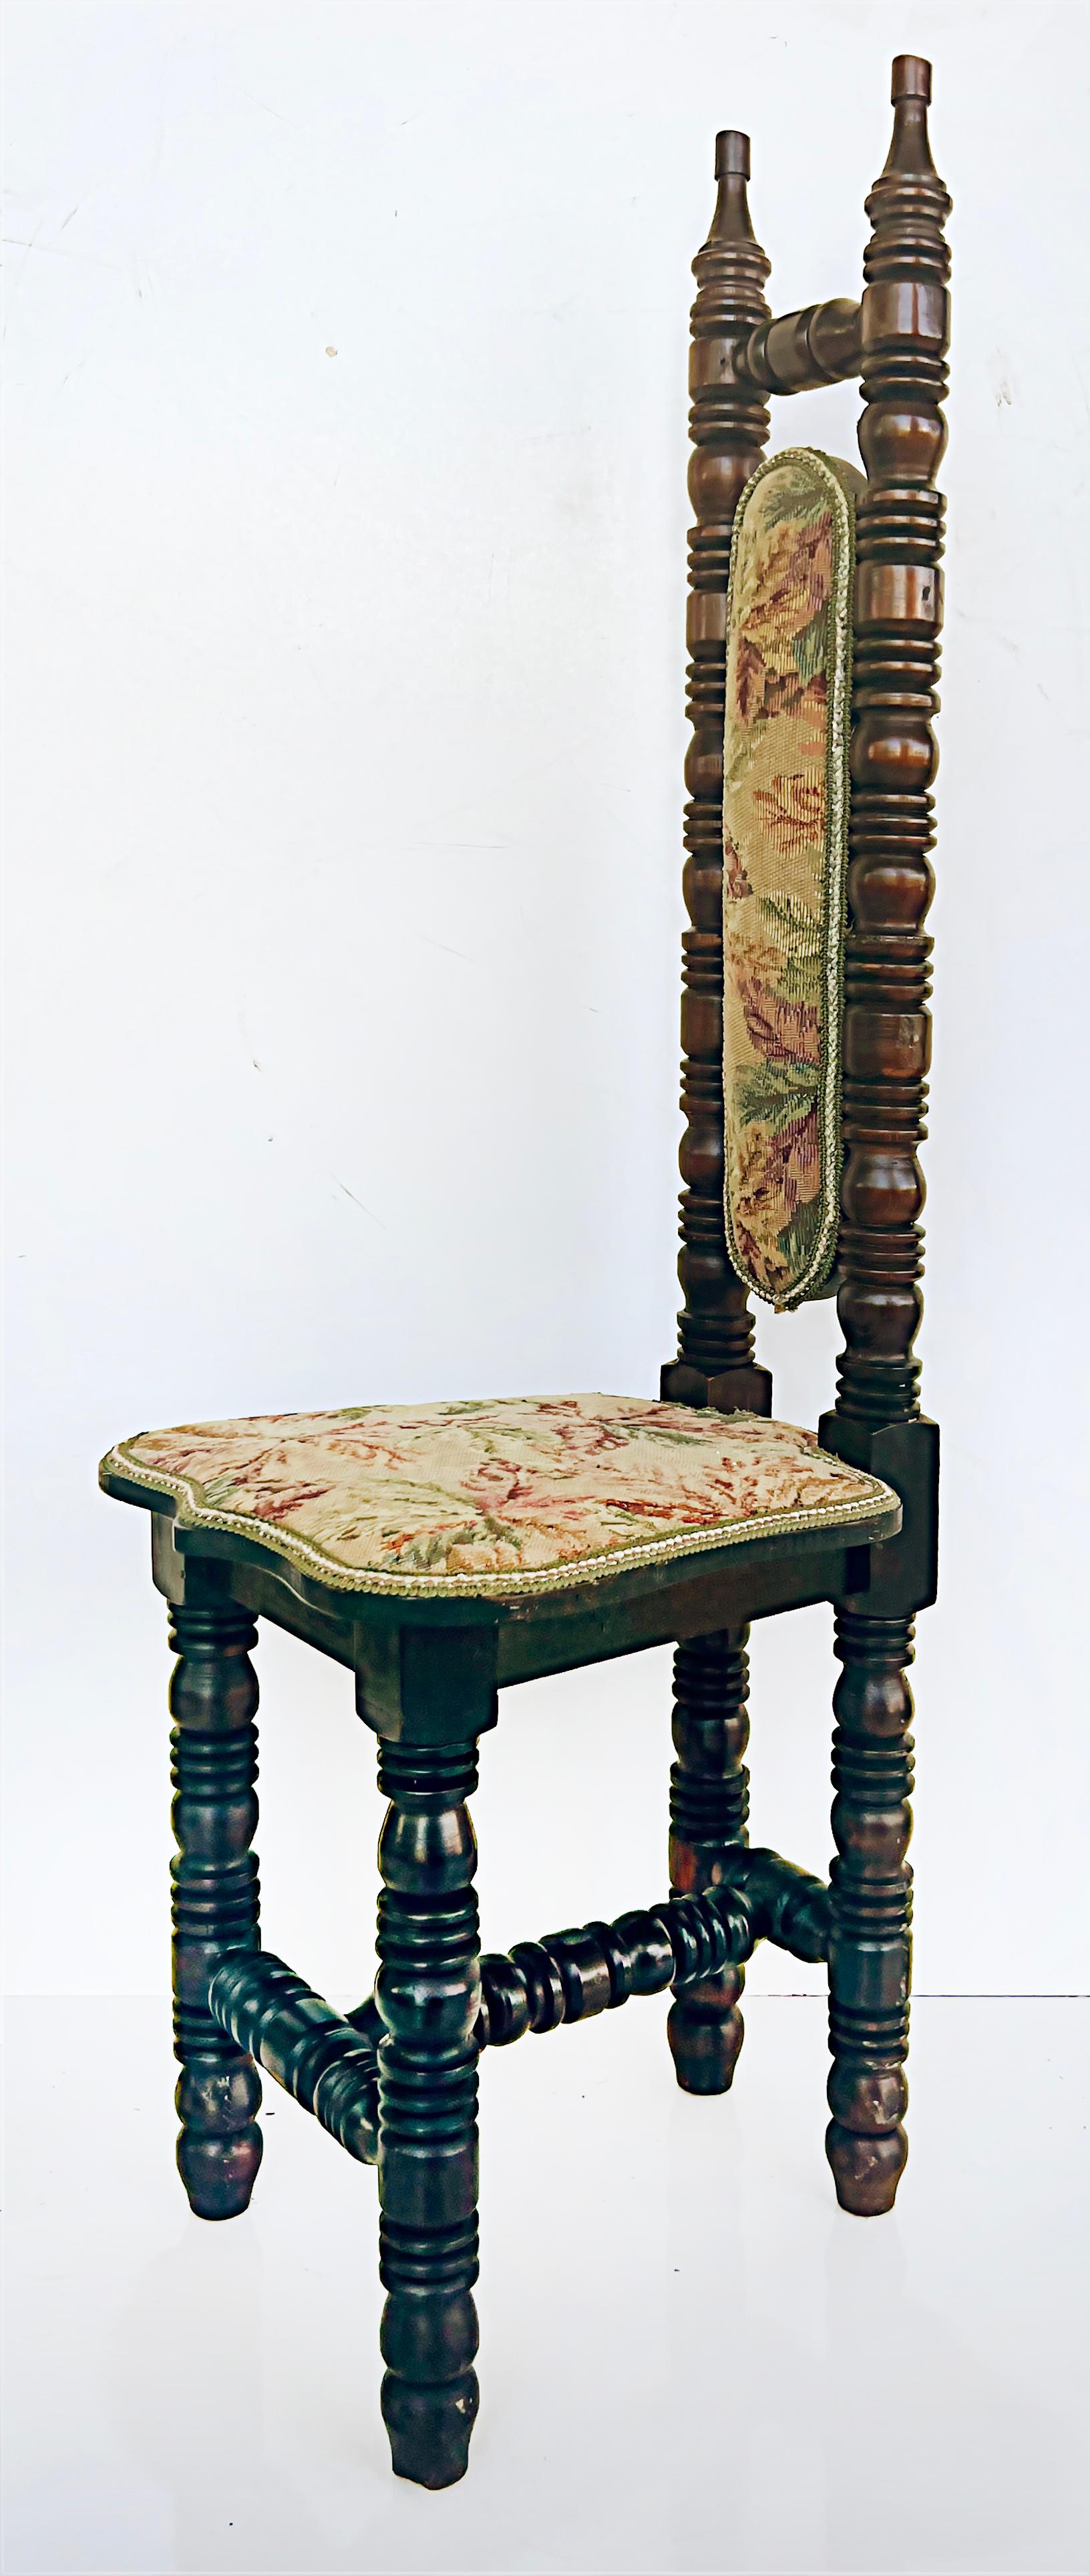 Vintage high back Jacobean style Spanish hall prayer chairs, pair

Offered for sale is a 20th-century vintage pair of high back Jacobean style Spanish hall prayer chairs with needlepoint upholstered seats and backs. The chairs are crafted with